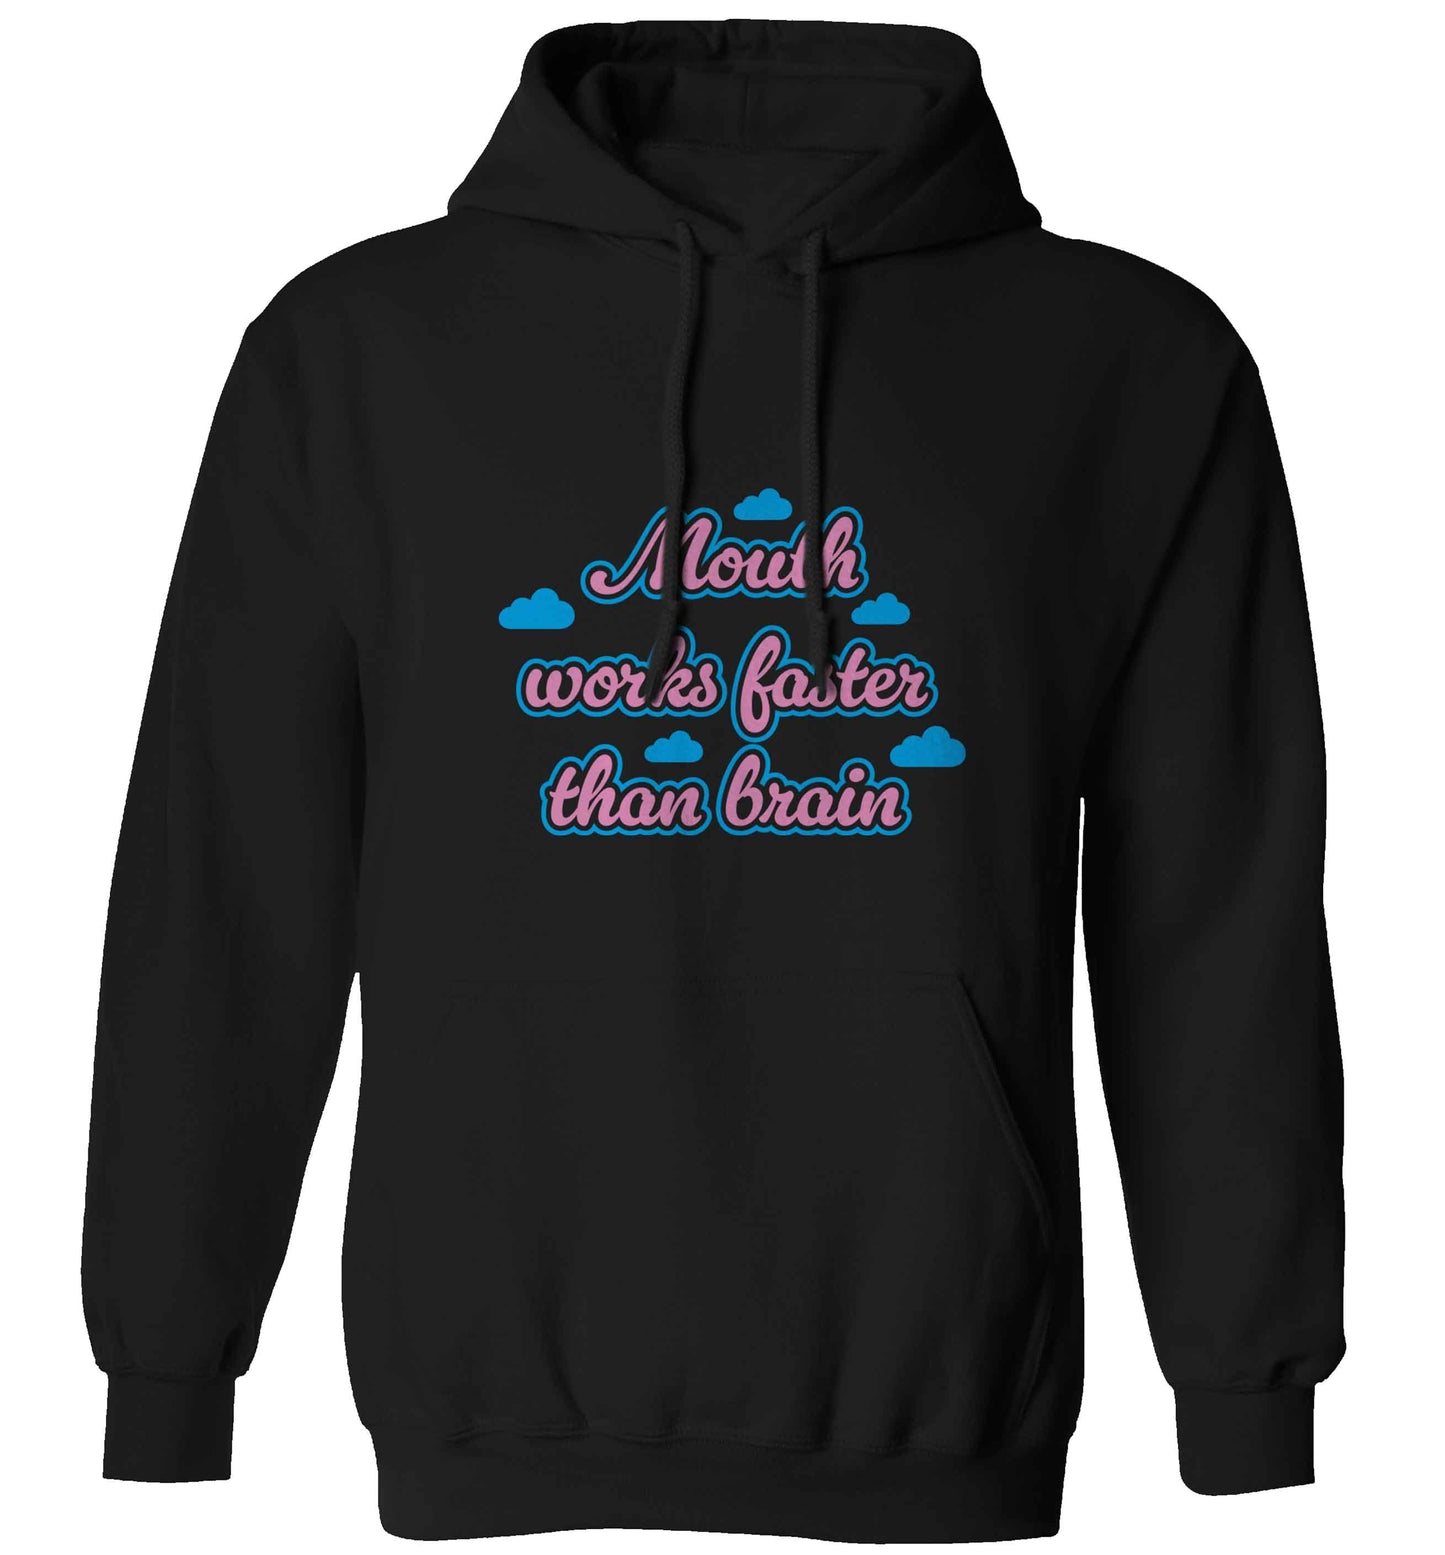 Mouth works faster than brain adults unisex black hoodie 2XL